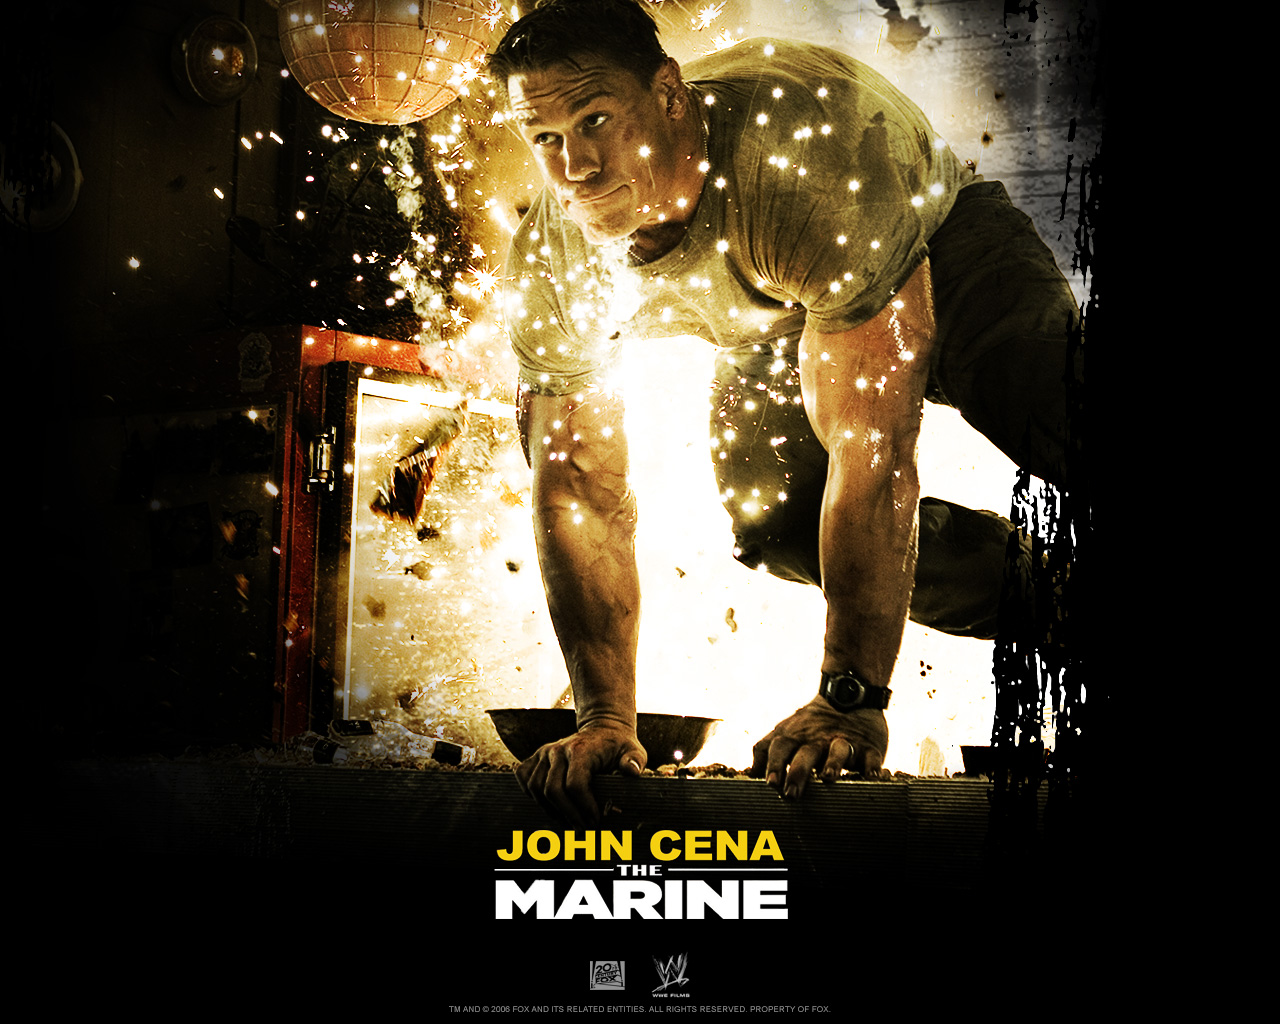 The Marine Desktop Wallpaper For HD Widescreen And Mobile